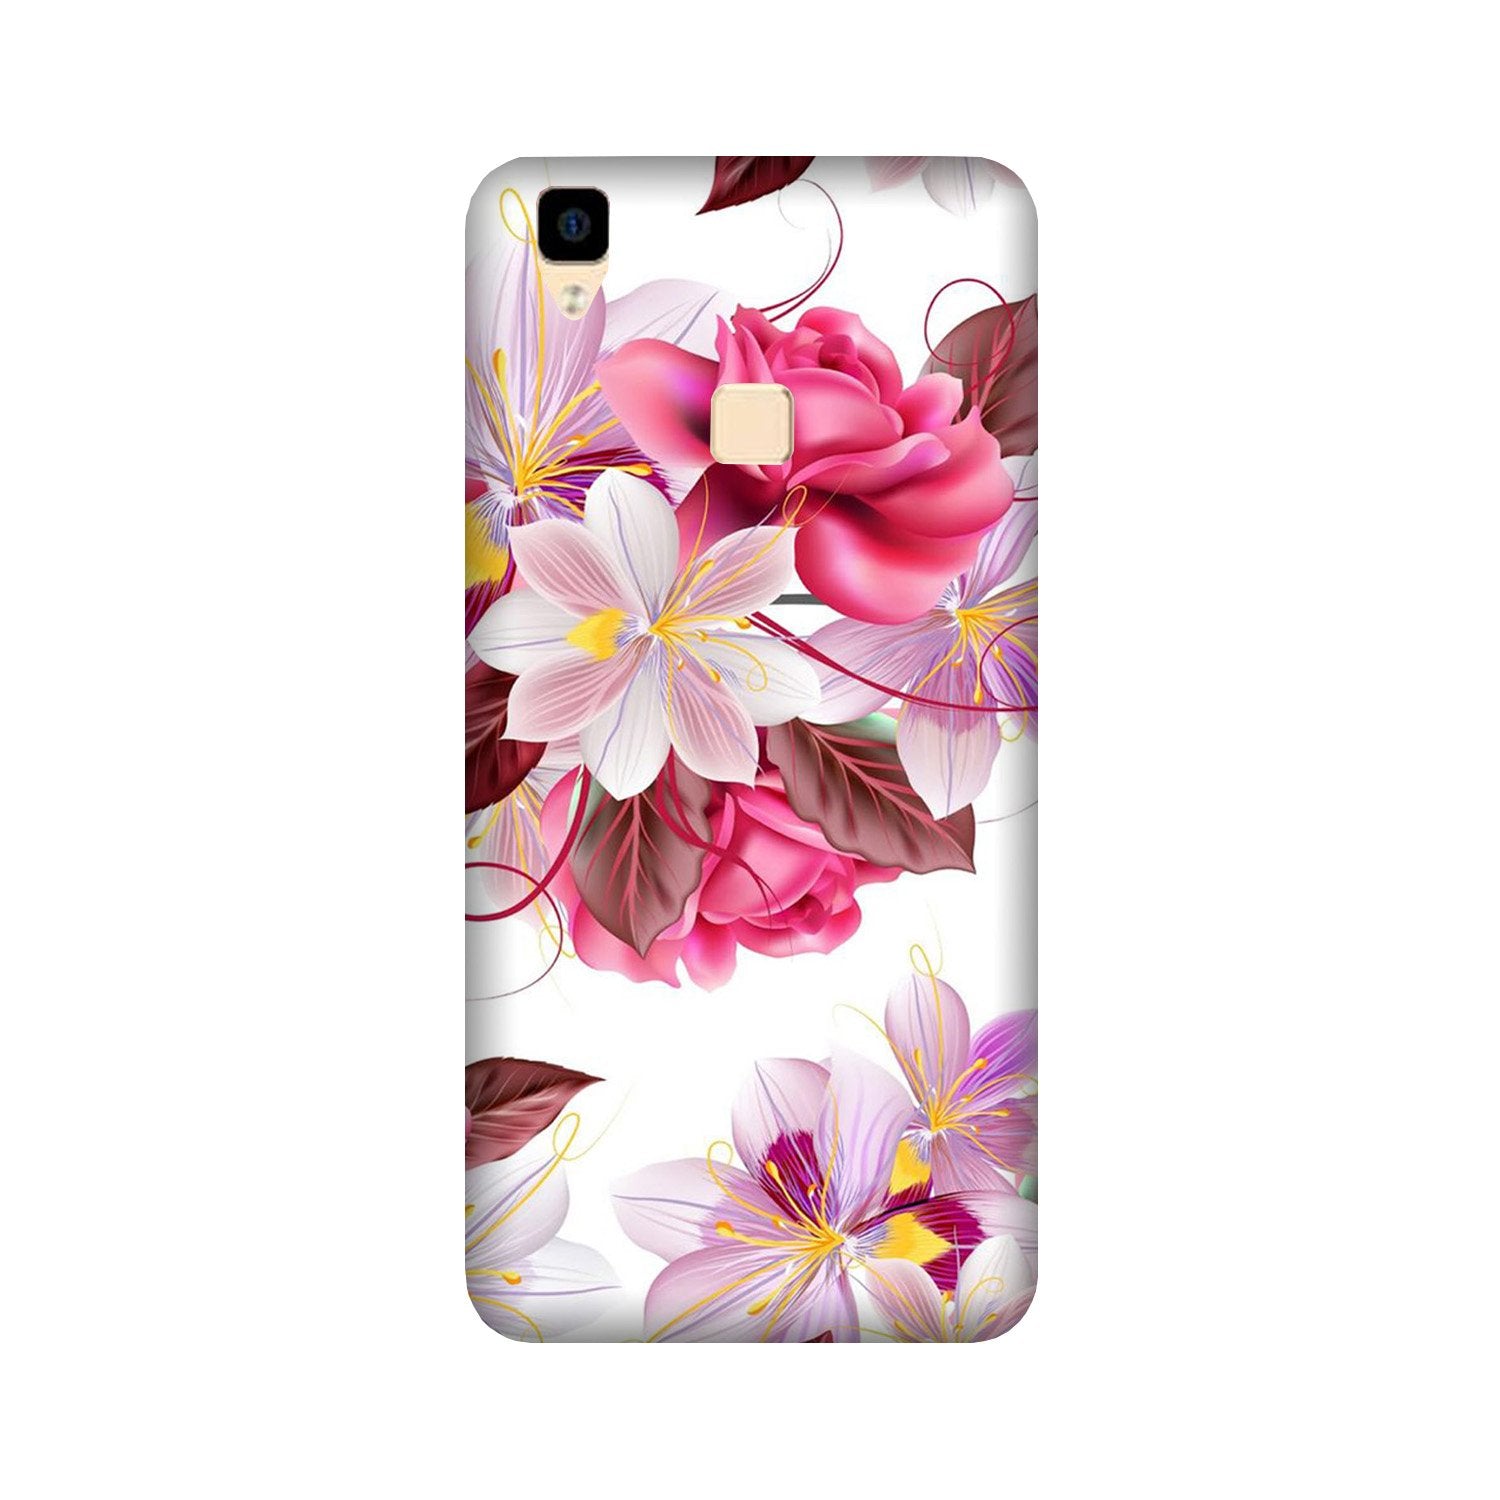 Beautiful flowers Case for Vivo V3 Max